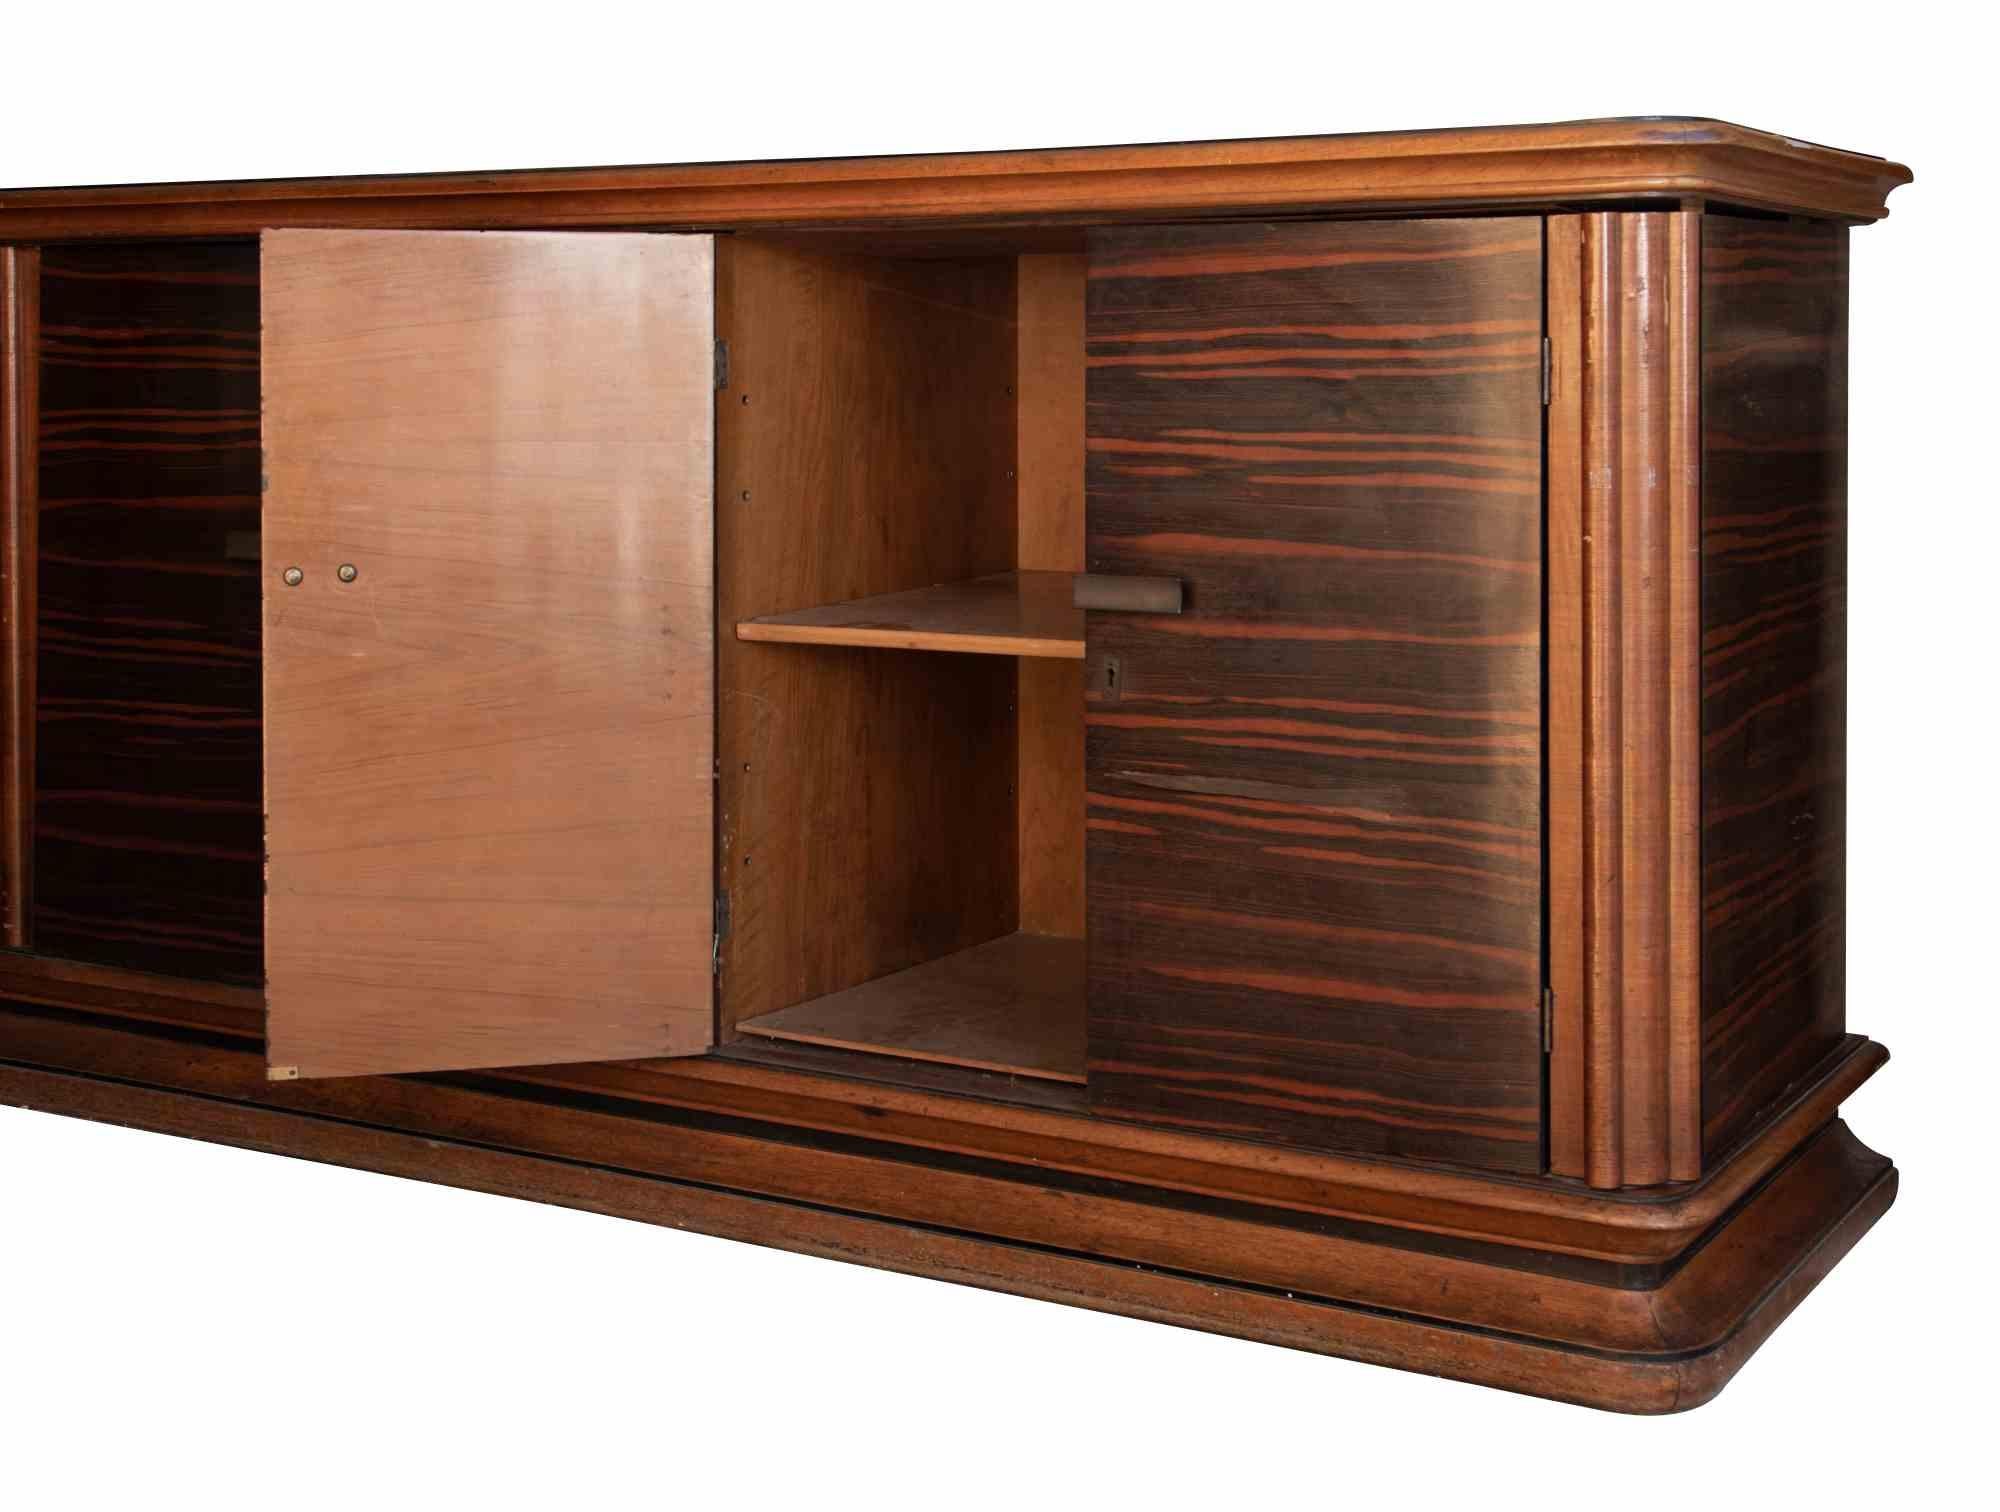 Vintage sideboard is an contemporary designer's furniture realized in Italy in the 1970s by Luciano Frigerio (1928–1999).

A vintage sideboard entirely realized in wood. Side doors and drawers in the central part

Made in Italy.

The weight is